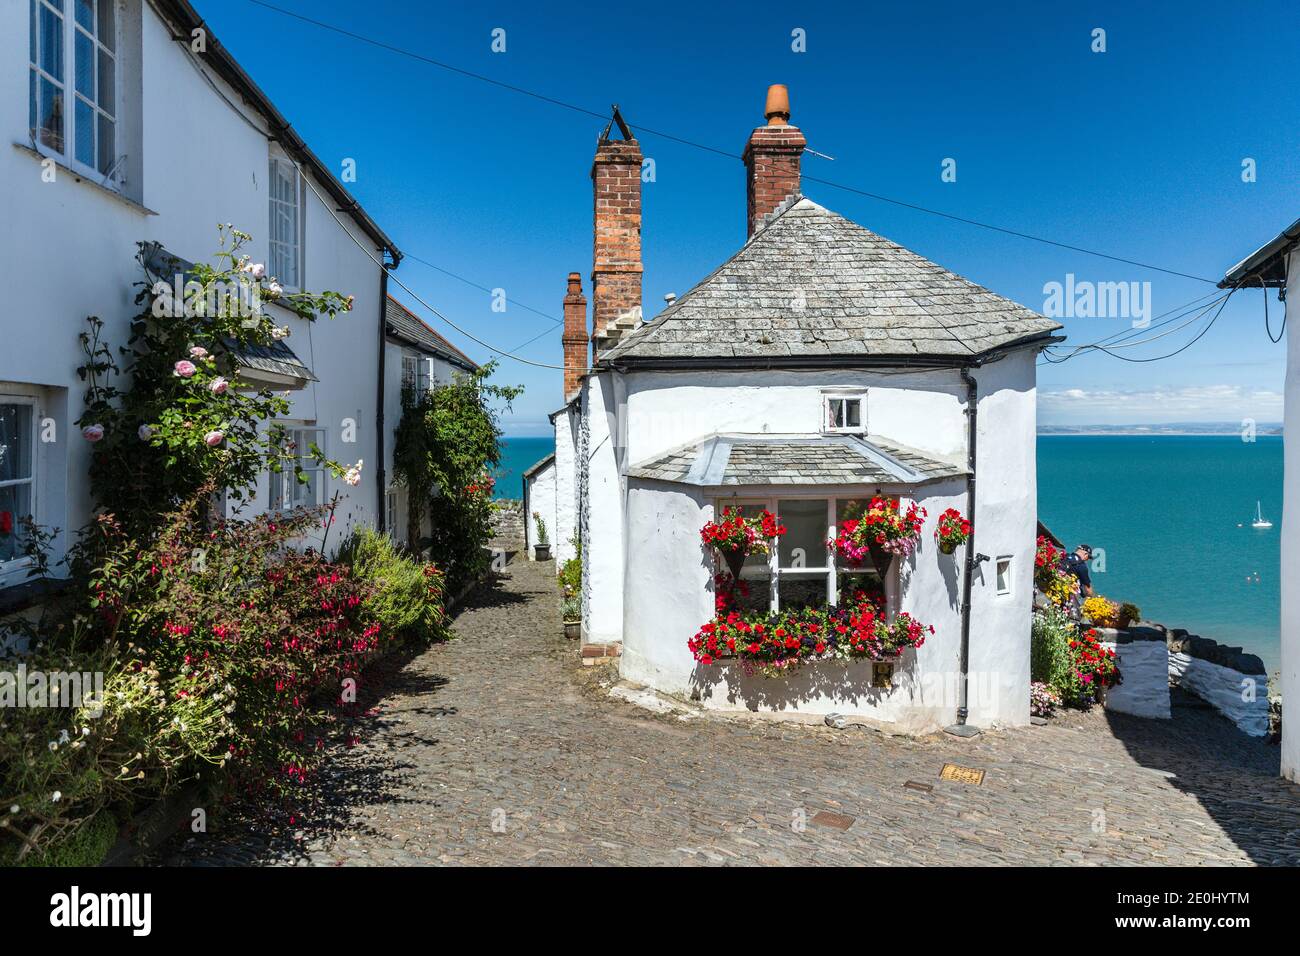 The picturesque coastal village of Clovelly in Devon, England, Uk Stock Photo